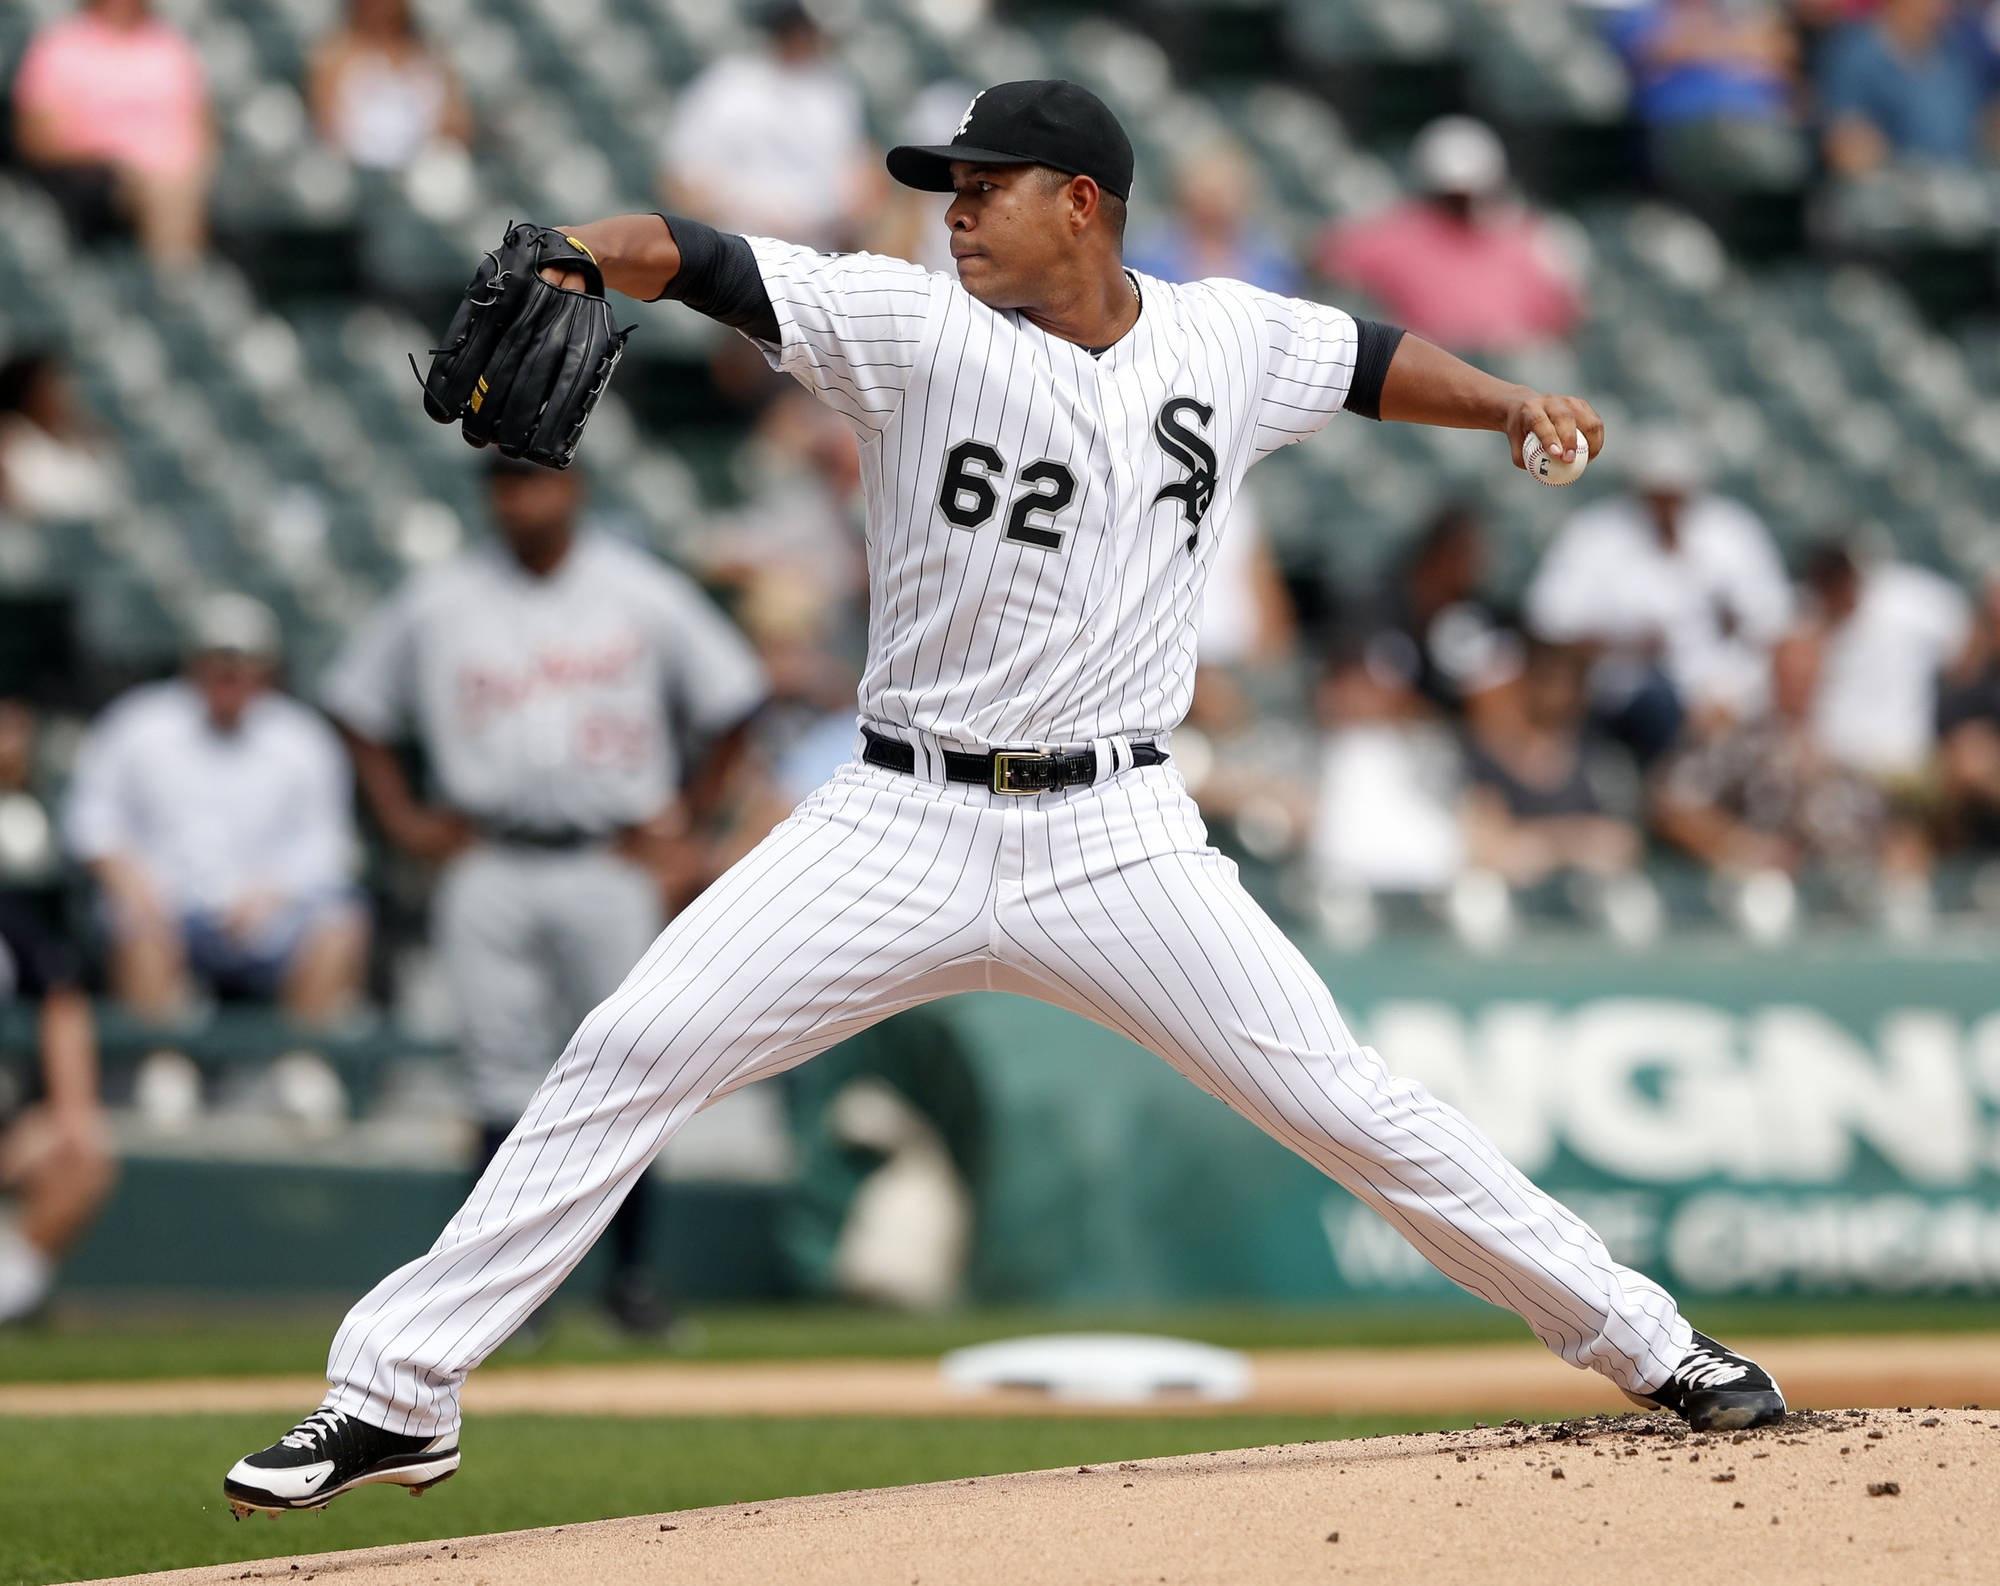 Do the Texas Rangers have the prospects to acquire Jose Quintana?